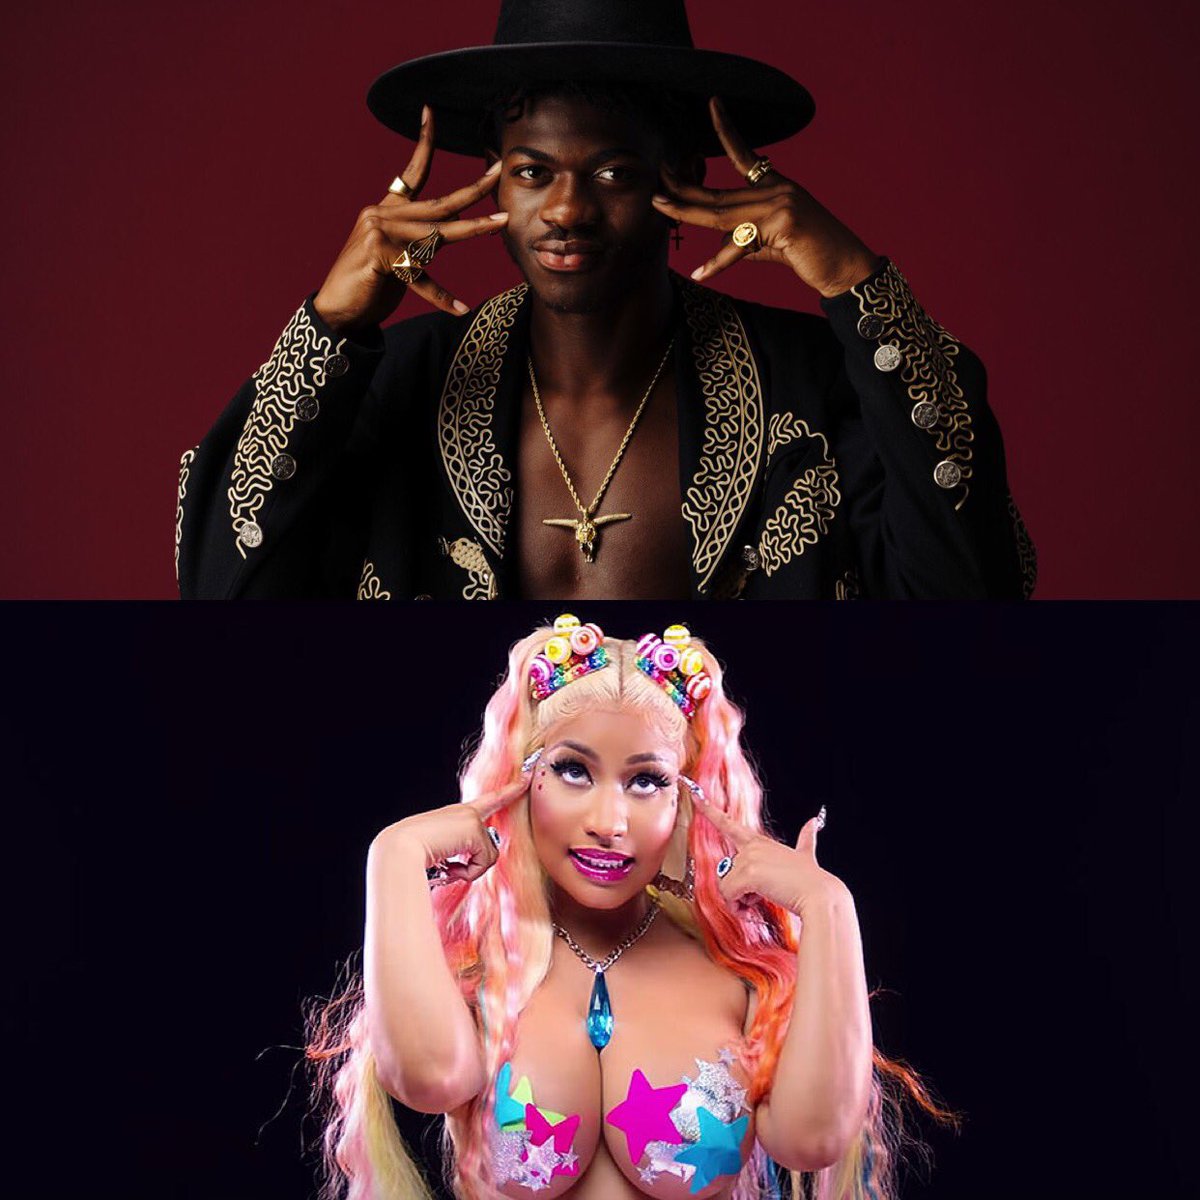 .@NickiMinaj shows love for @LilNasX after "coming out" as a Barb